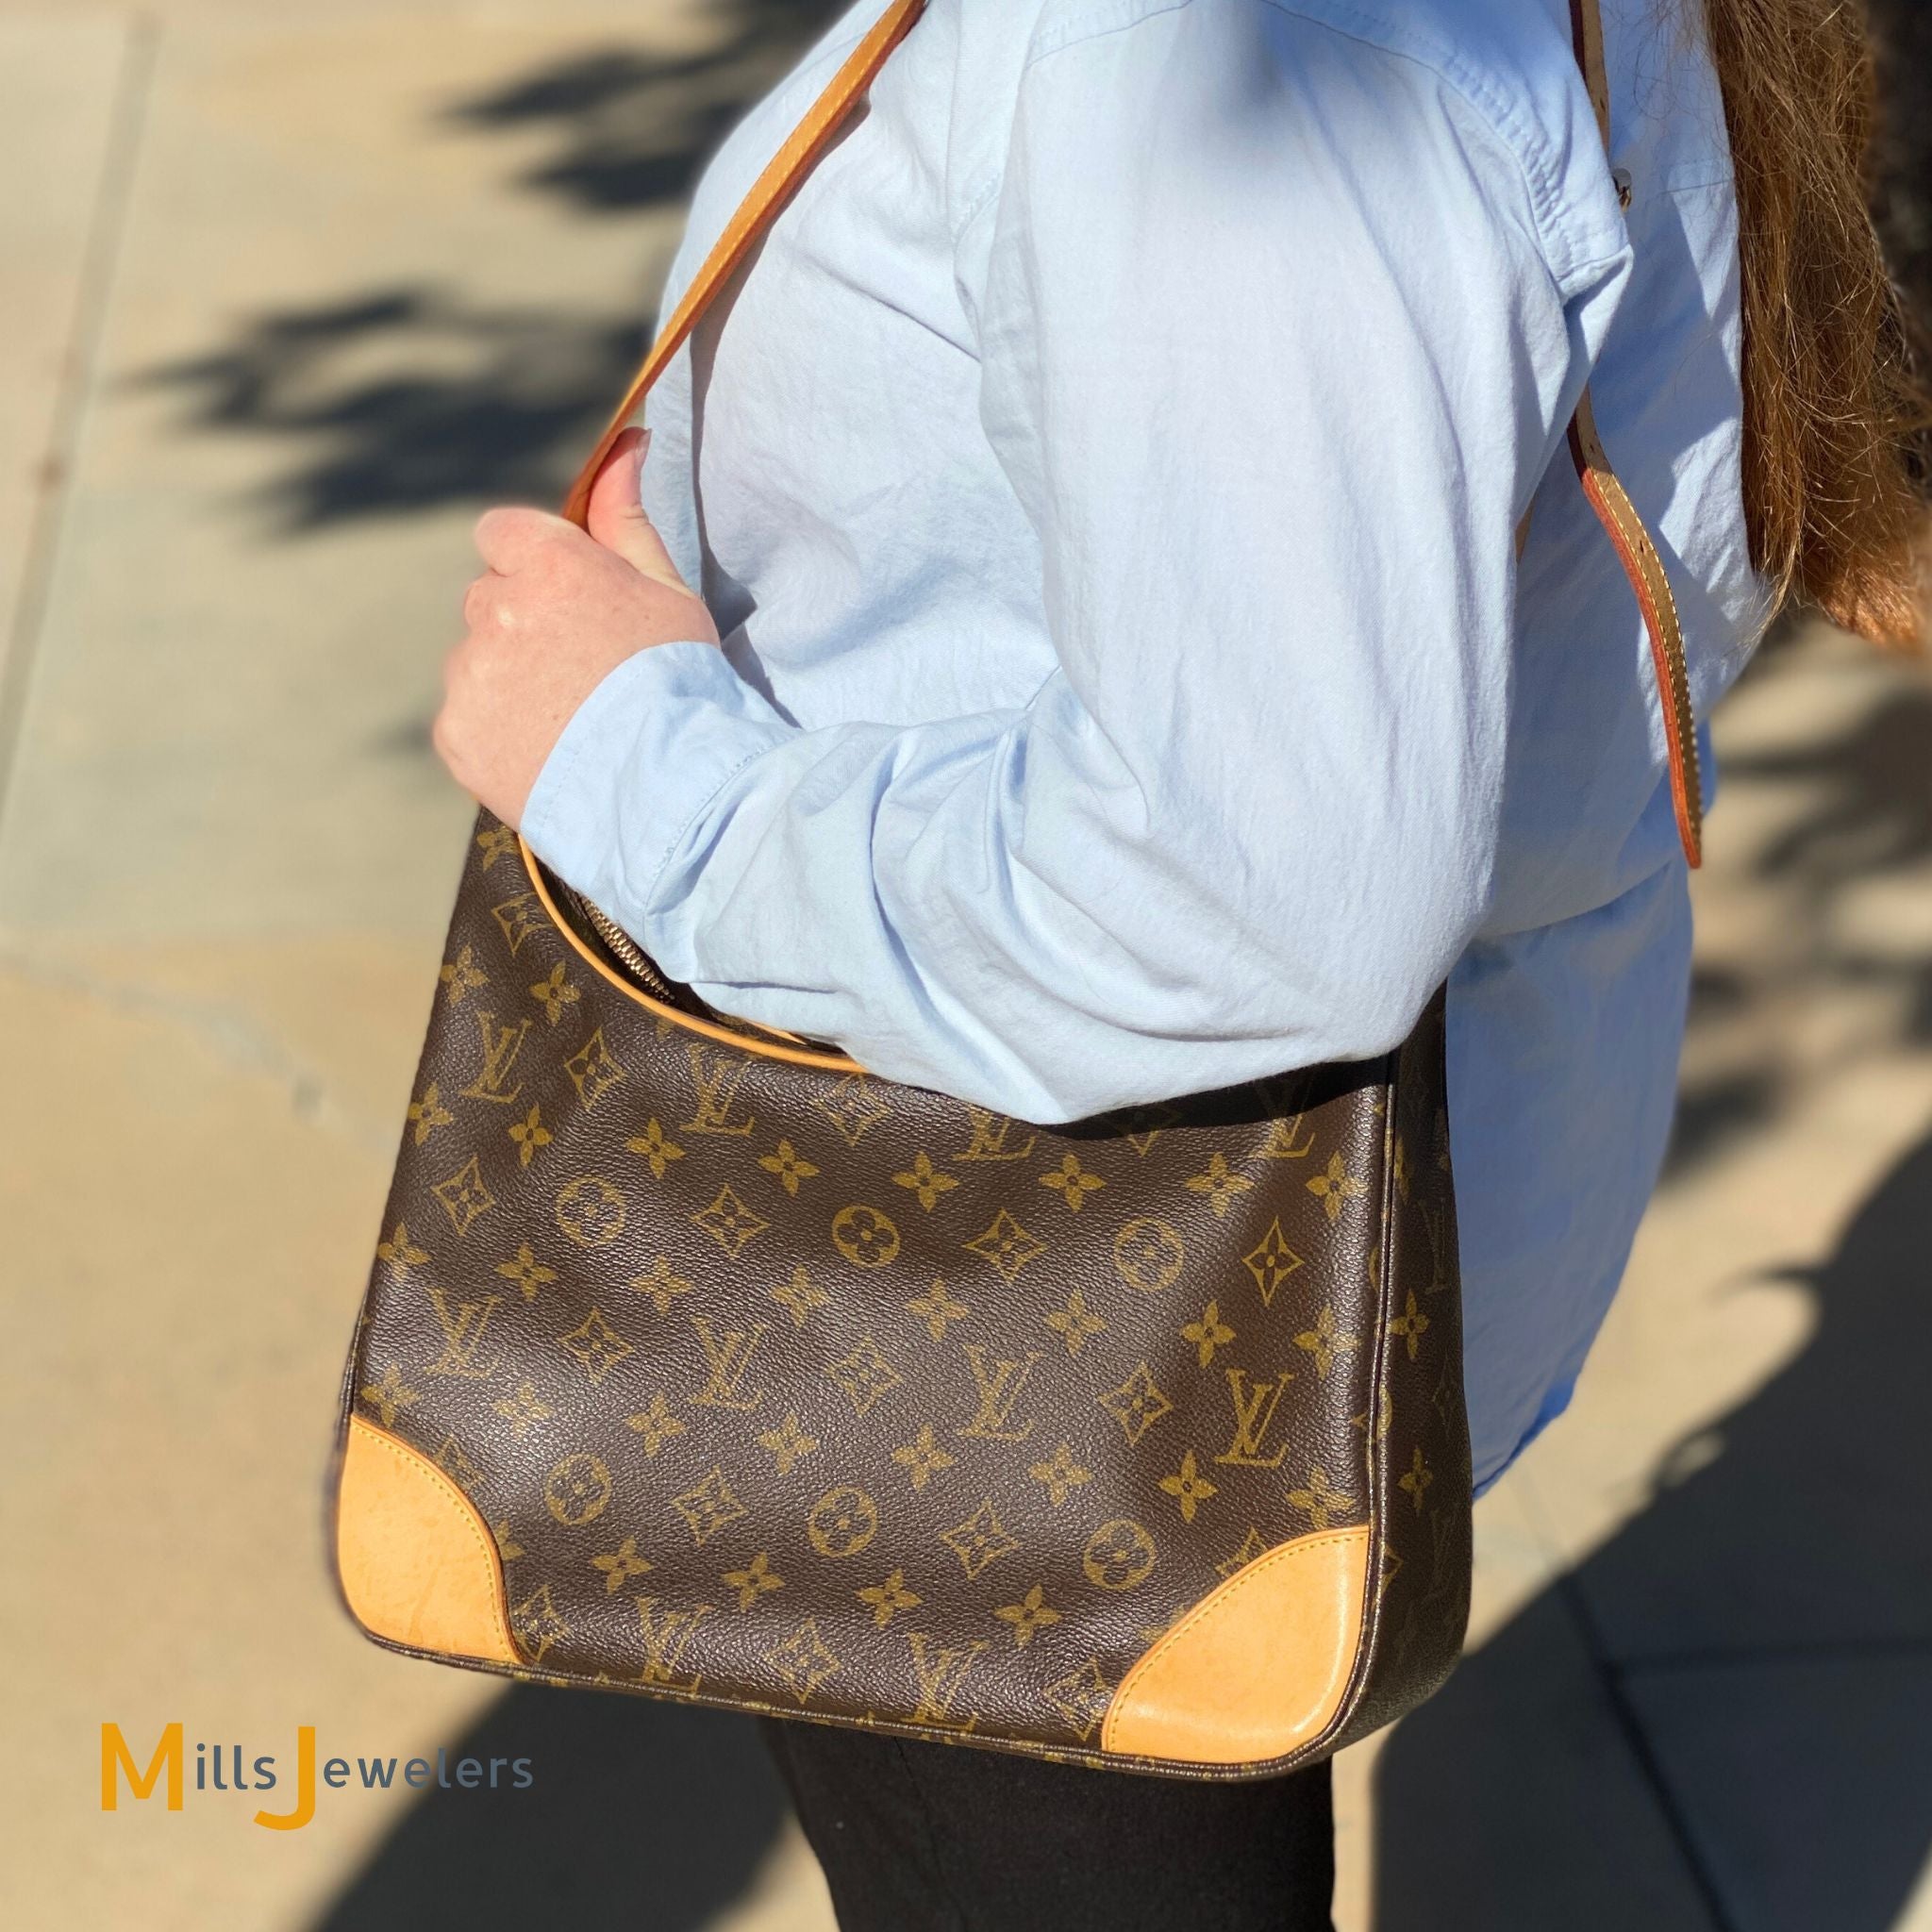 Shop for Louis Vuitton Monogram Canvas Leather Boulogne 30 PM Bag - Shipped  from USA